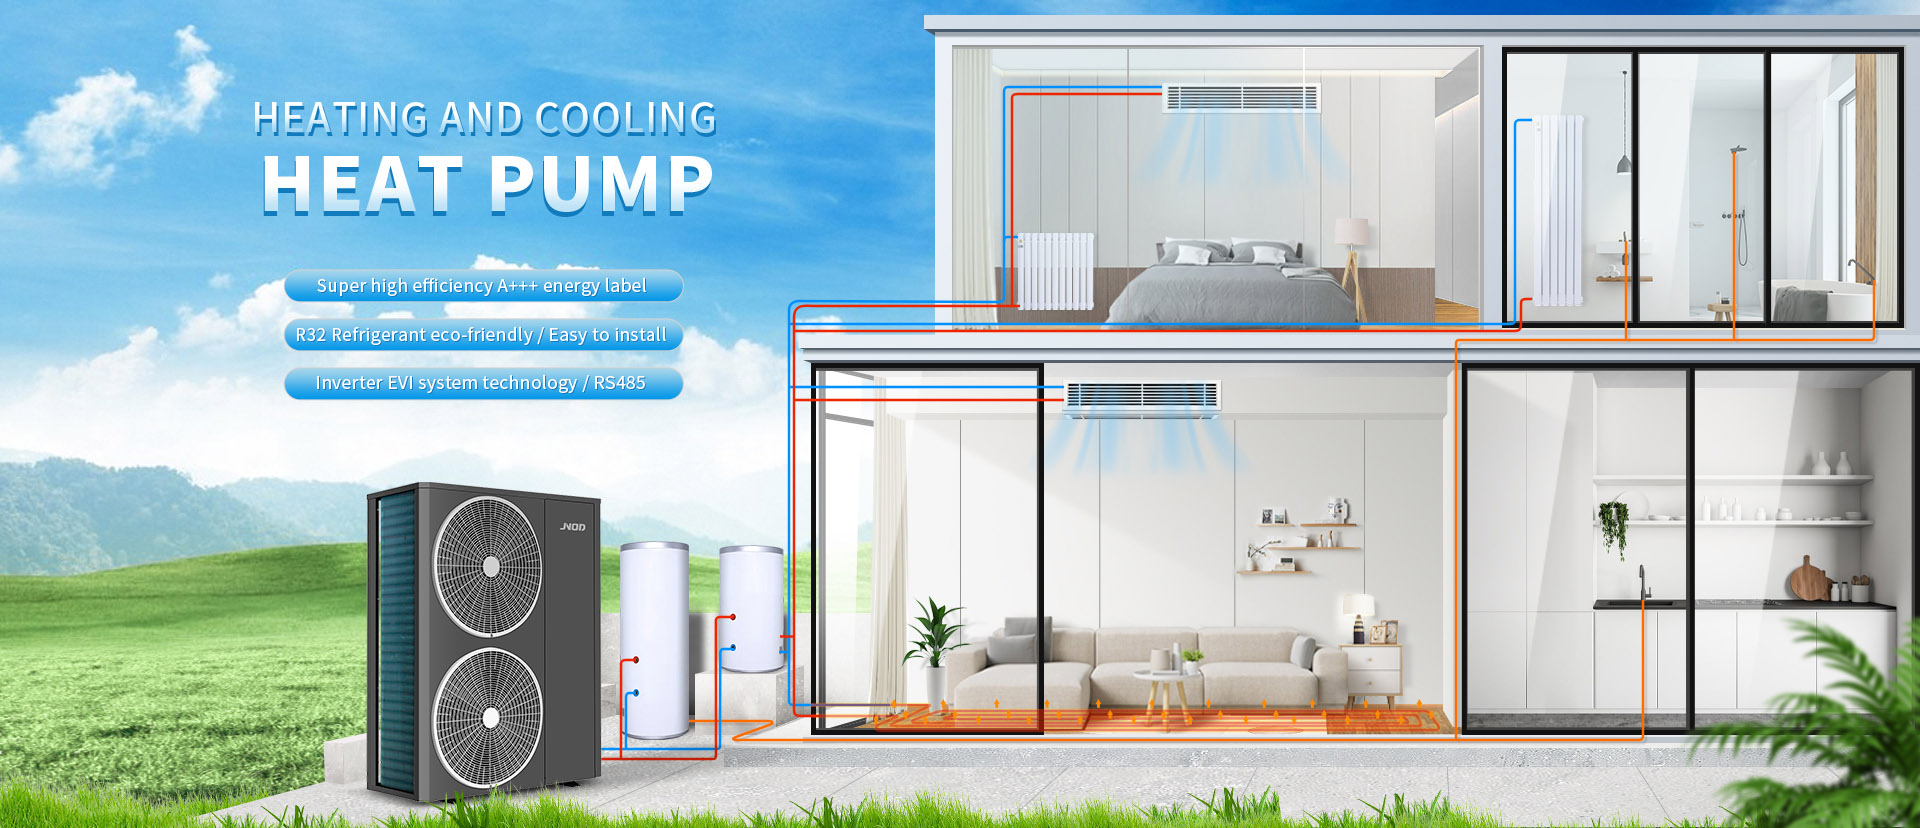 Heating And Cooling Heat Pump agency price